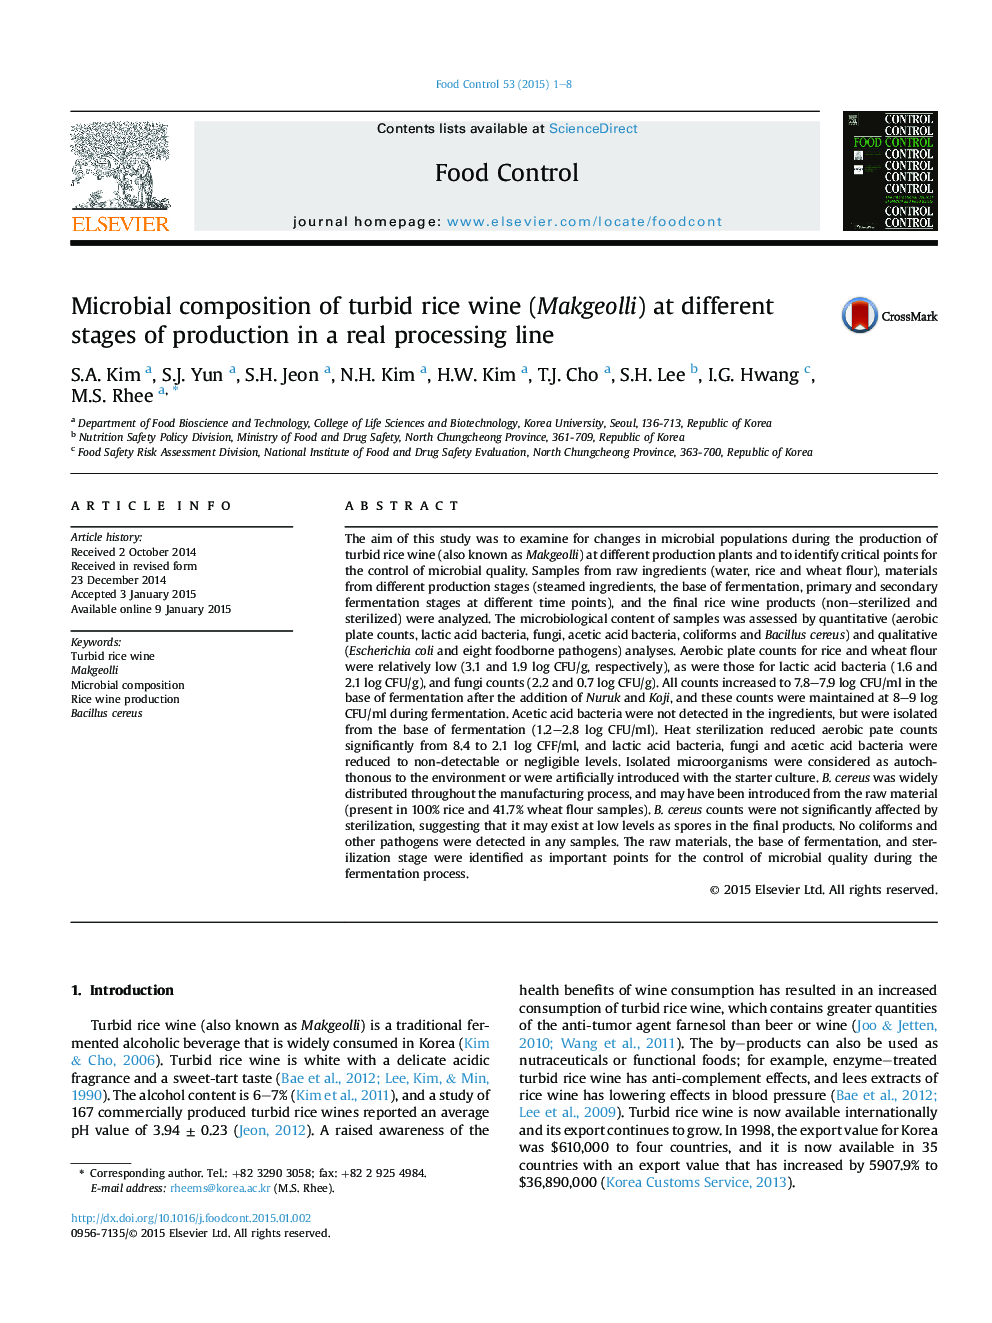 Microbial composition of turbid rice wine (Makgeolli) at different stages of production in a real processing line